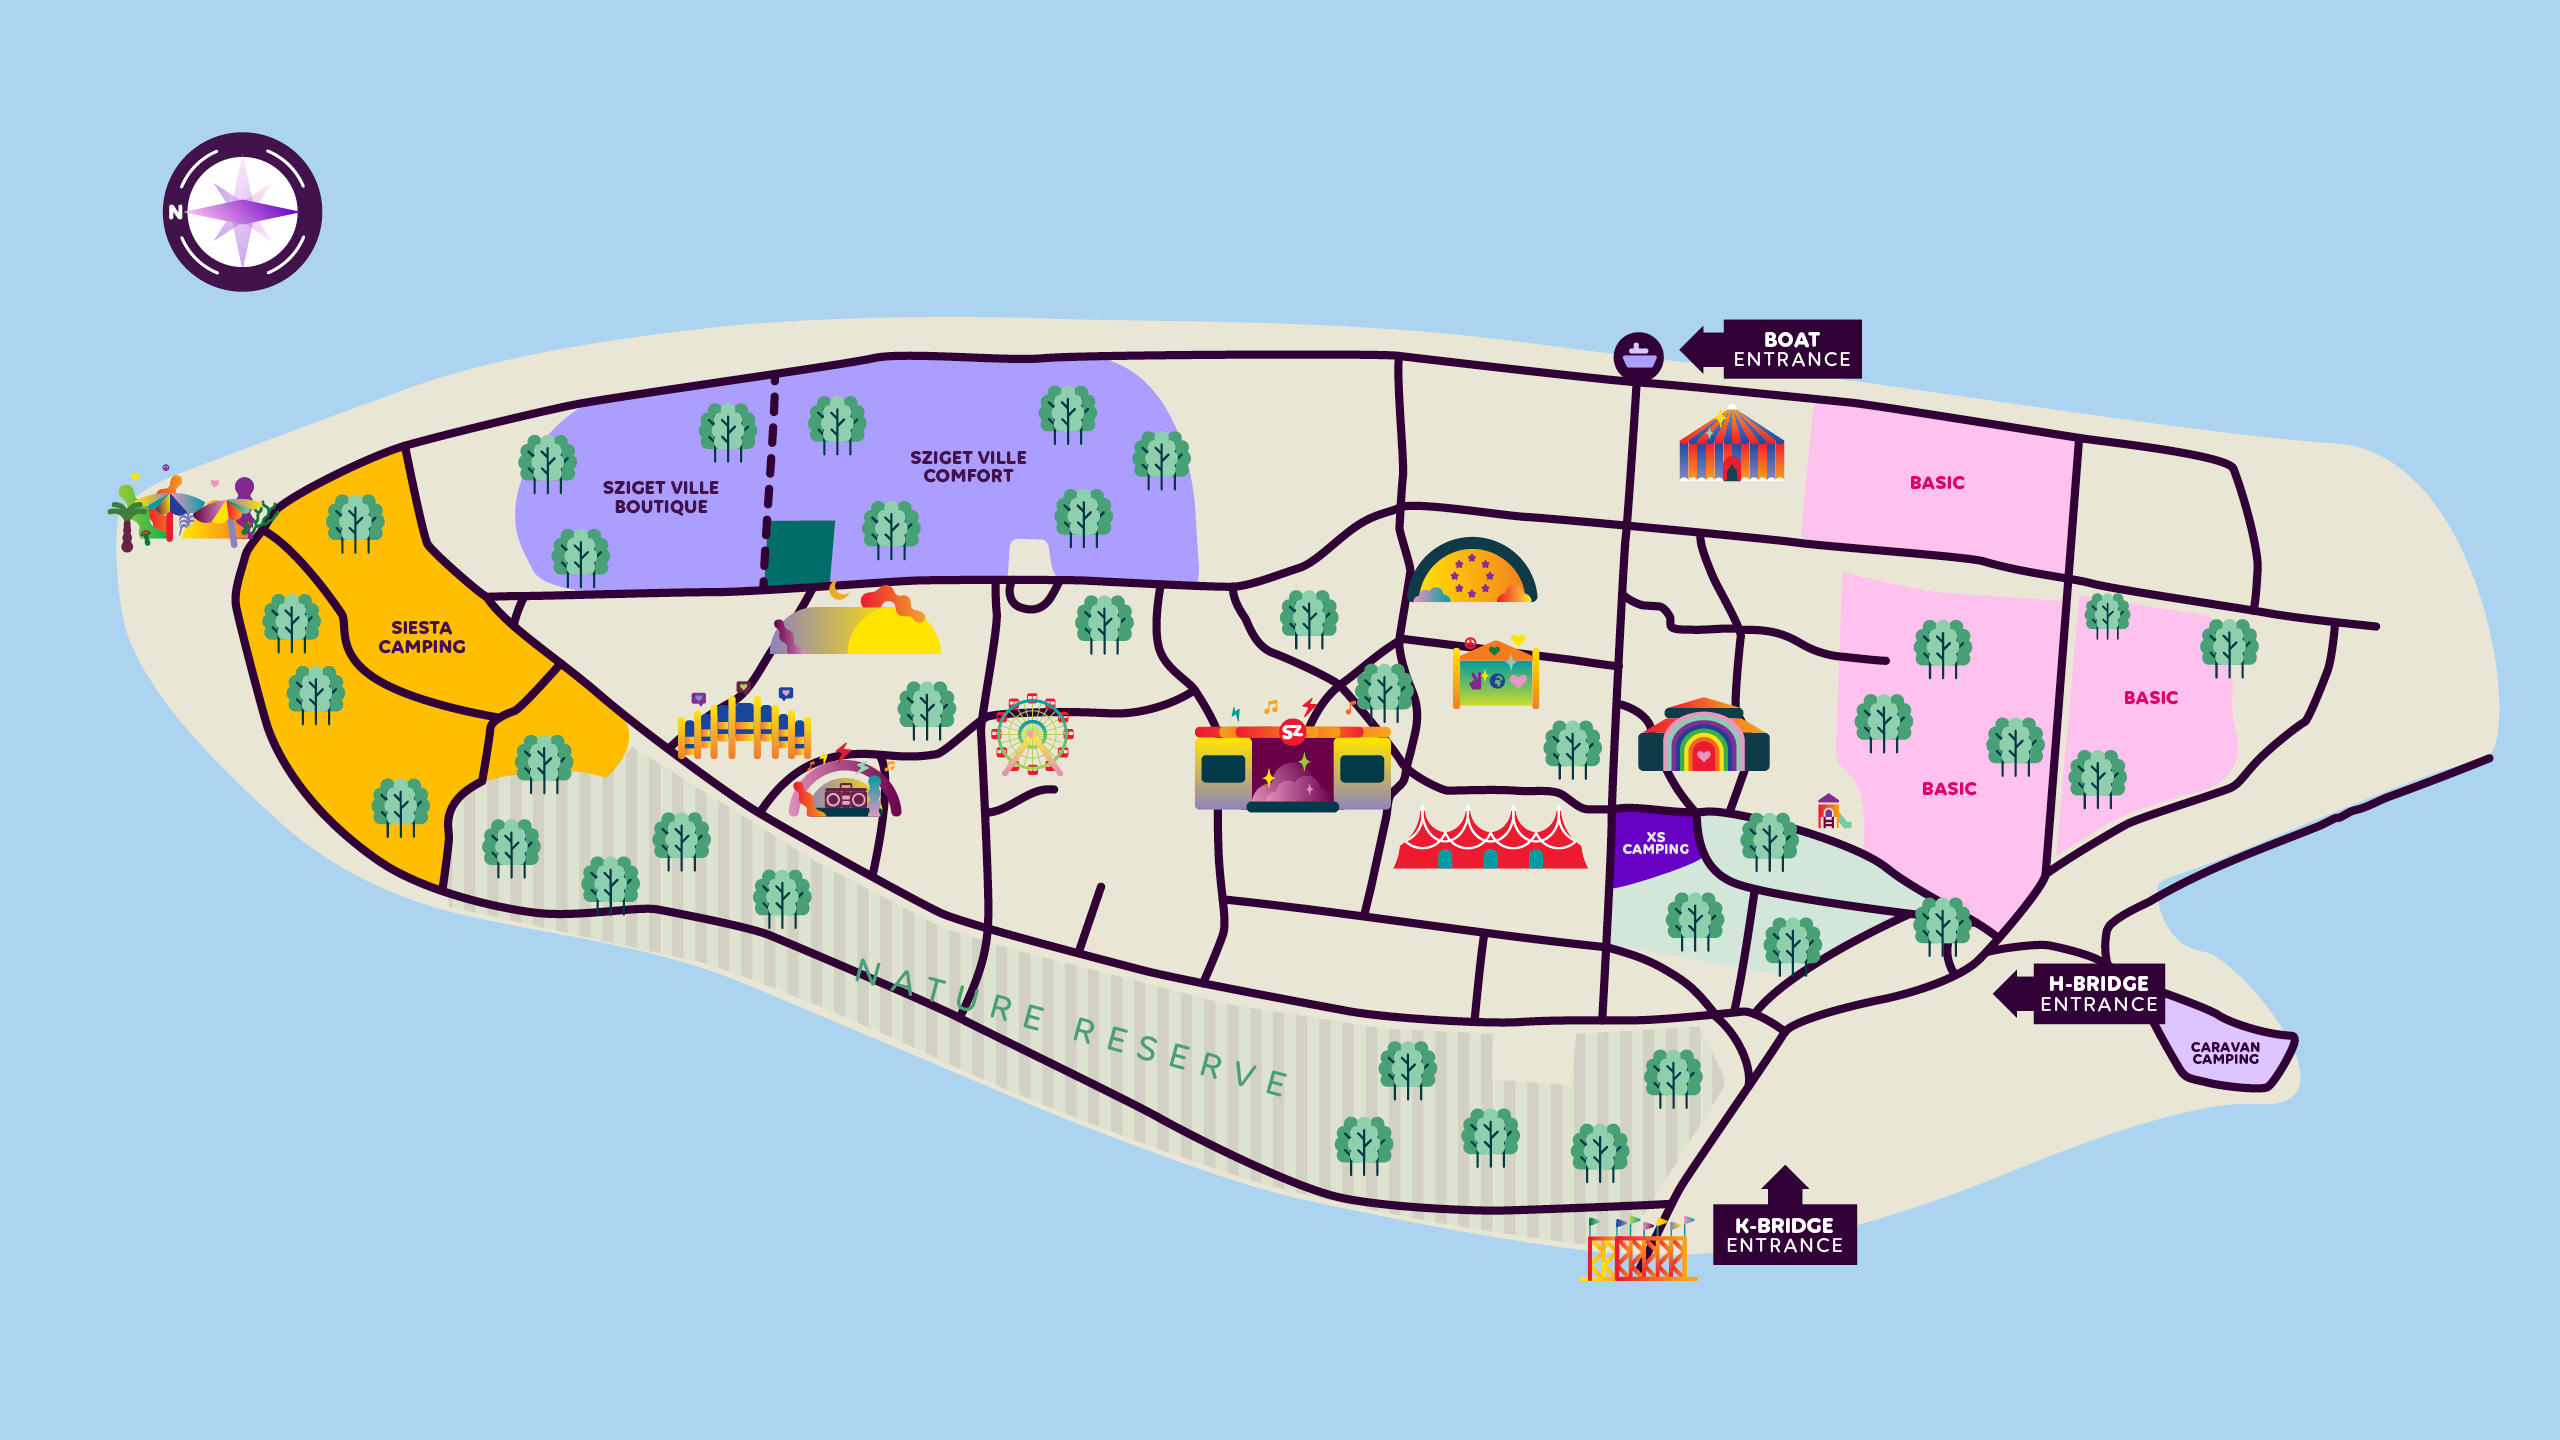 https://cdn2.szigetfestival.com/c21yue2/f851/sk/media/2022/11/2023map_camping_plus.png